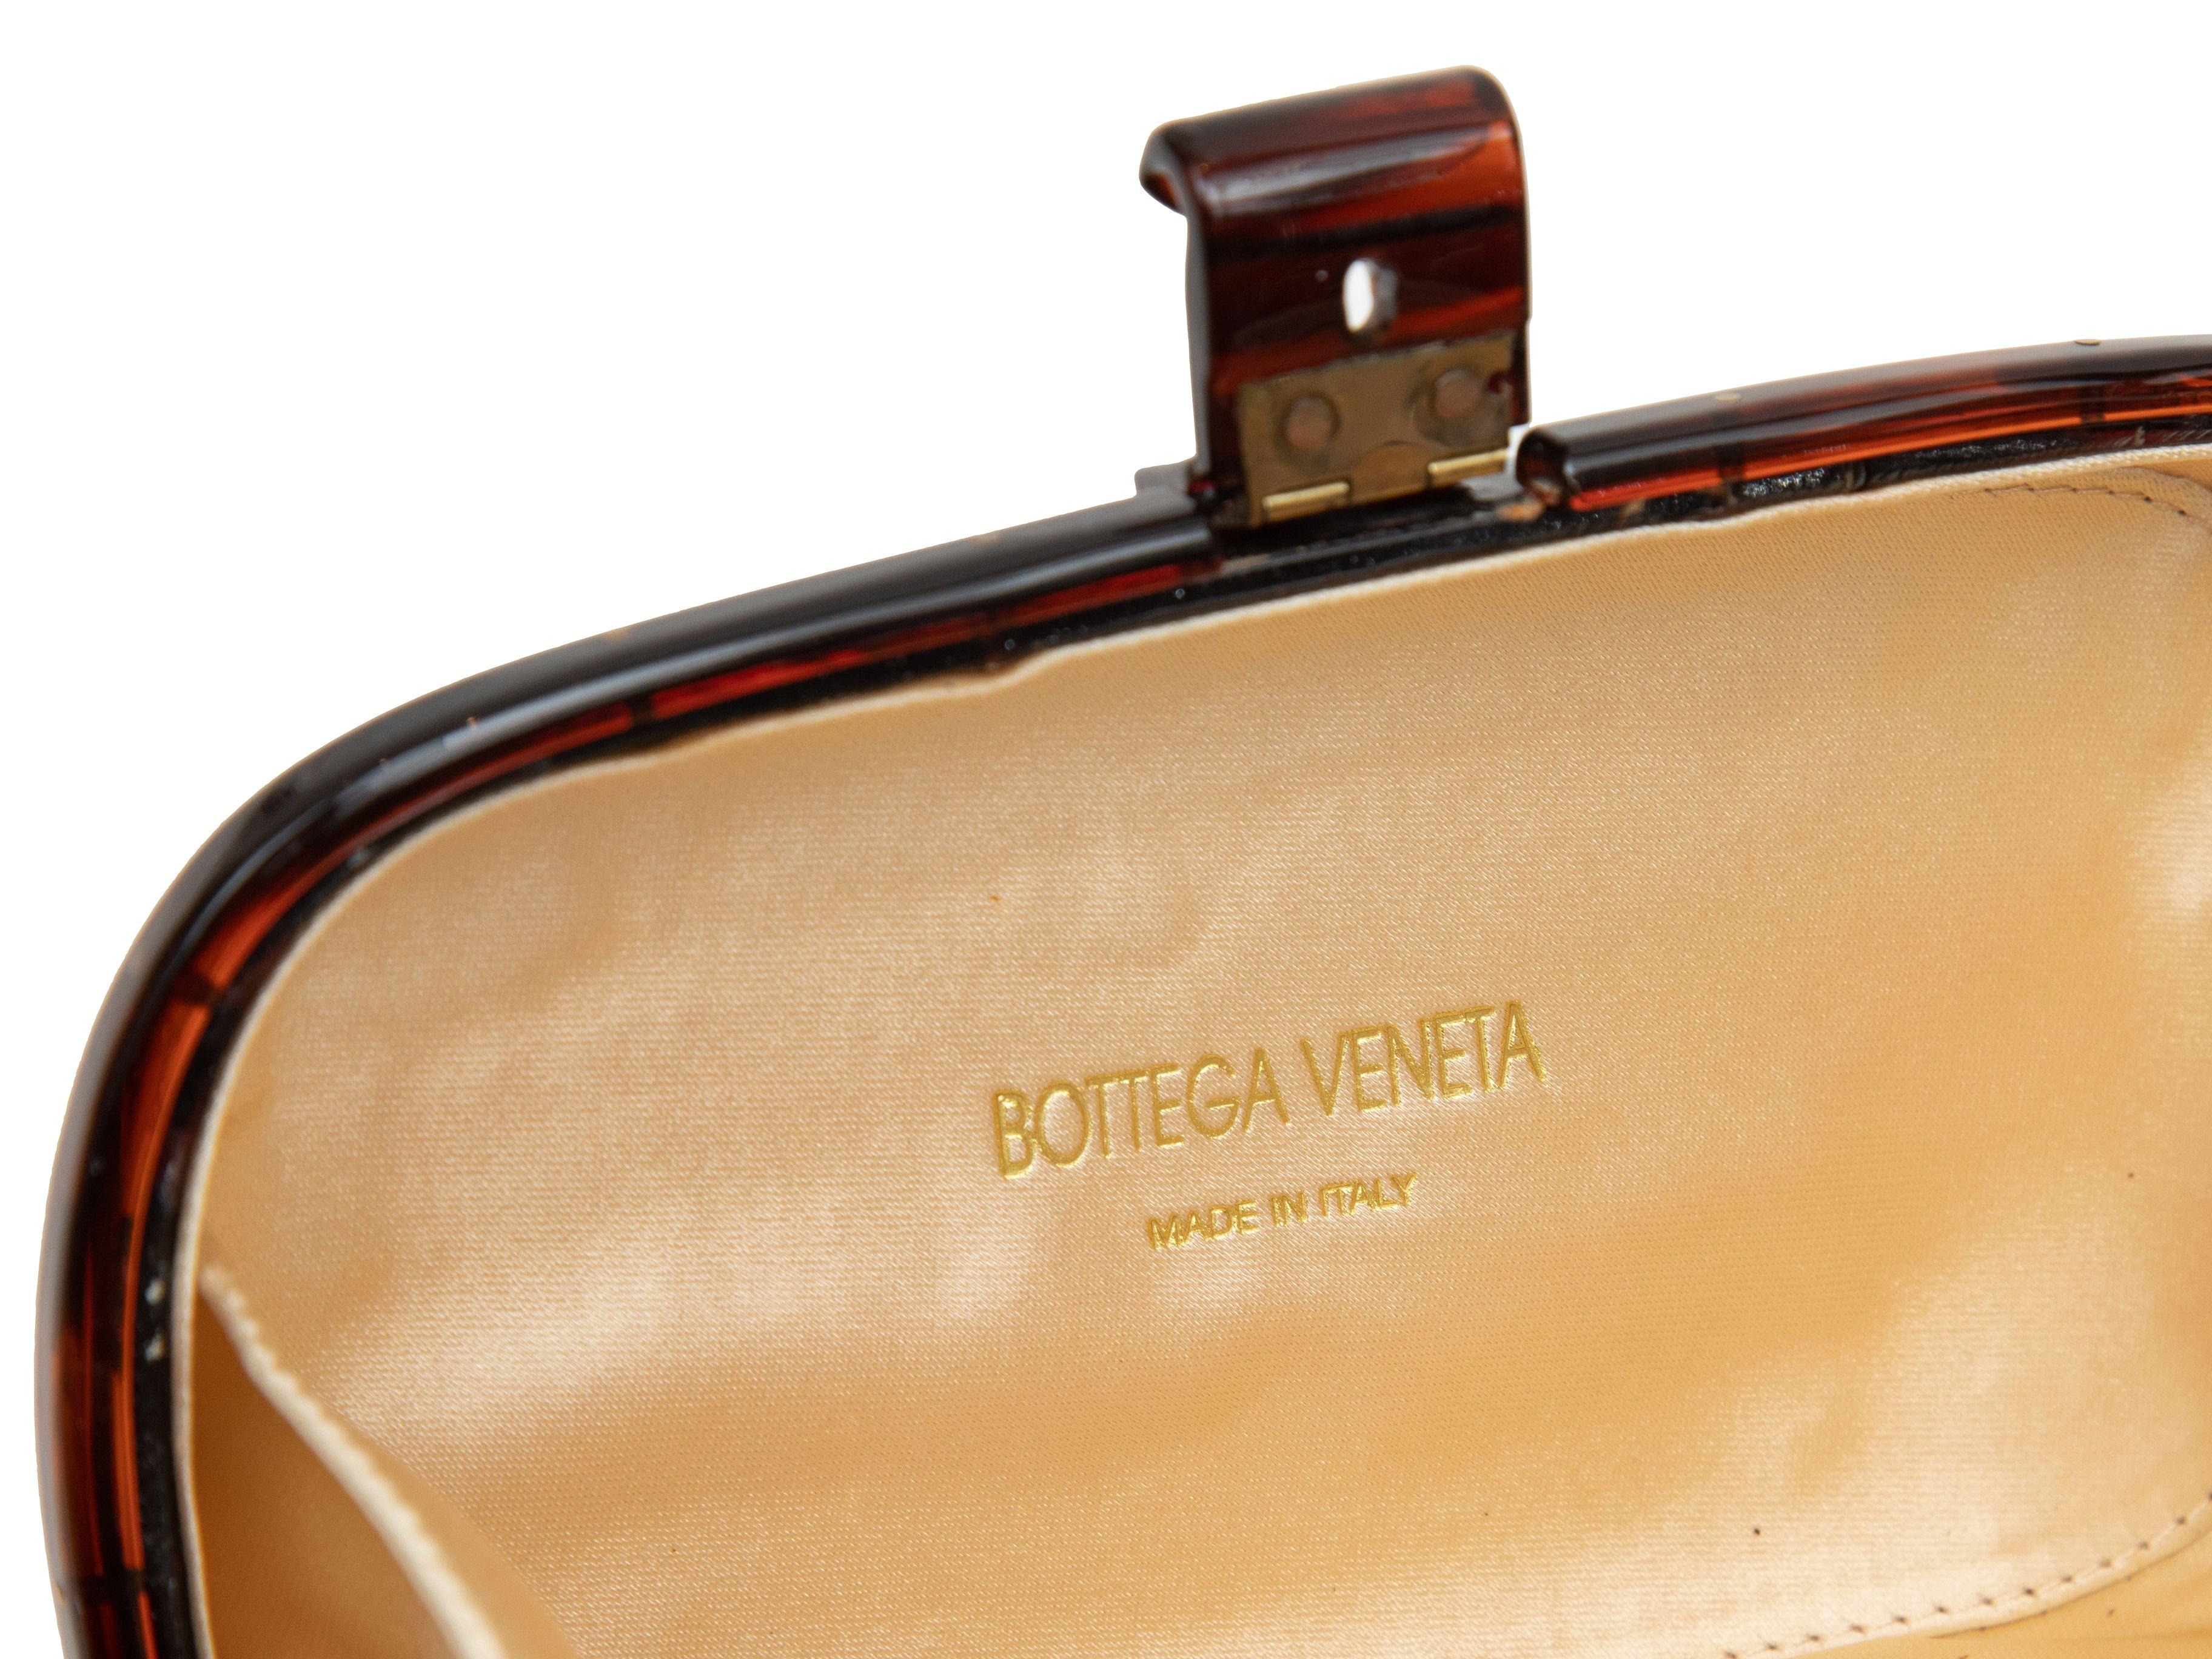 Product Details: Tortoiseshell Bottega Veneta Hard Shell Clutch. This clutch features an acrylic body, satin interior, and top clasp closure. 6